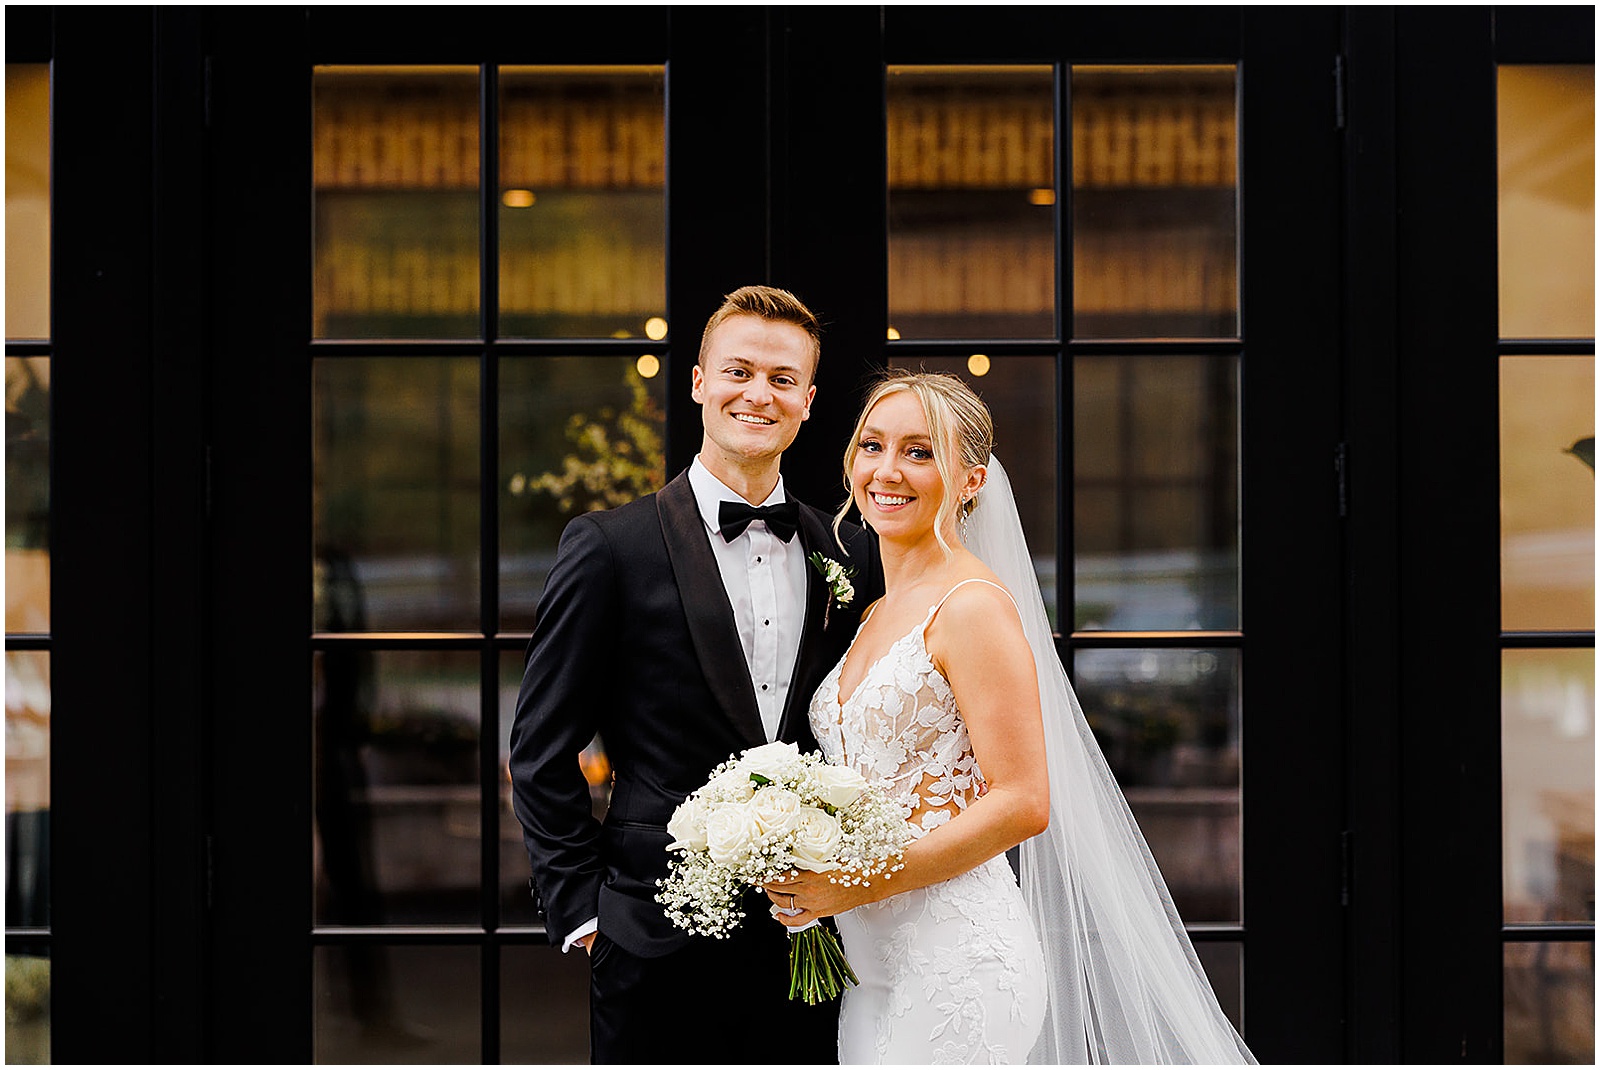 A bride and groom pose in front of glass doors at their Perona Farms wedding.